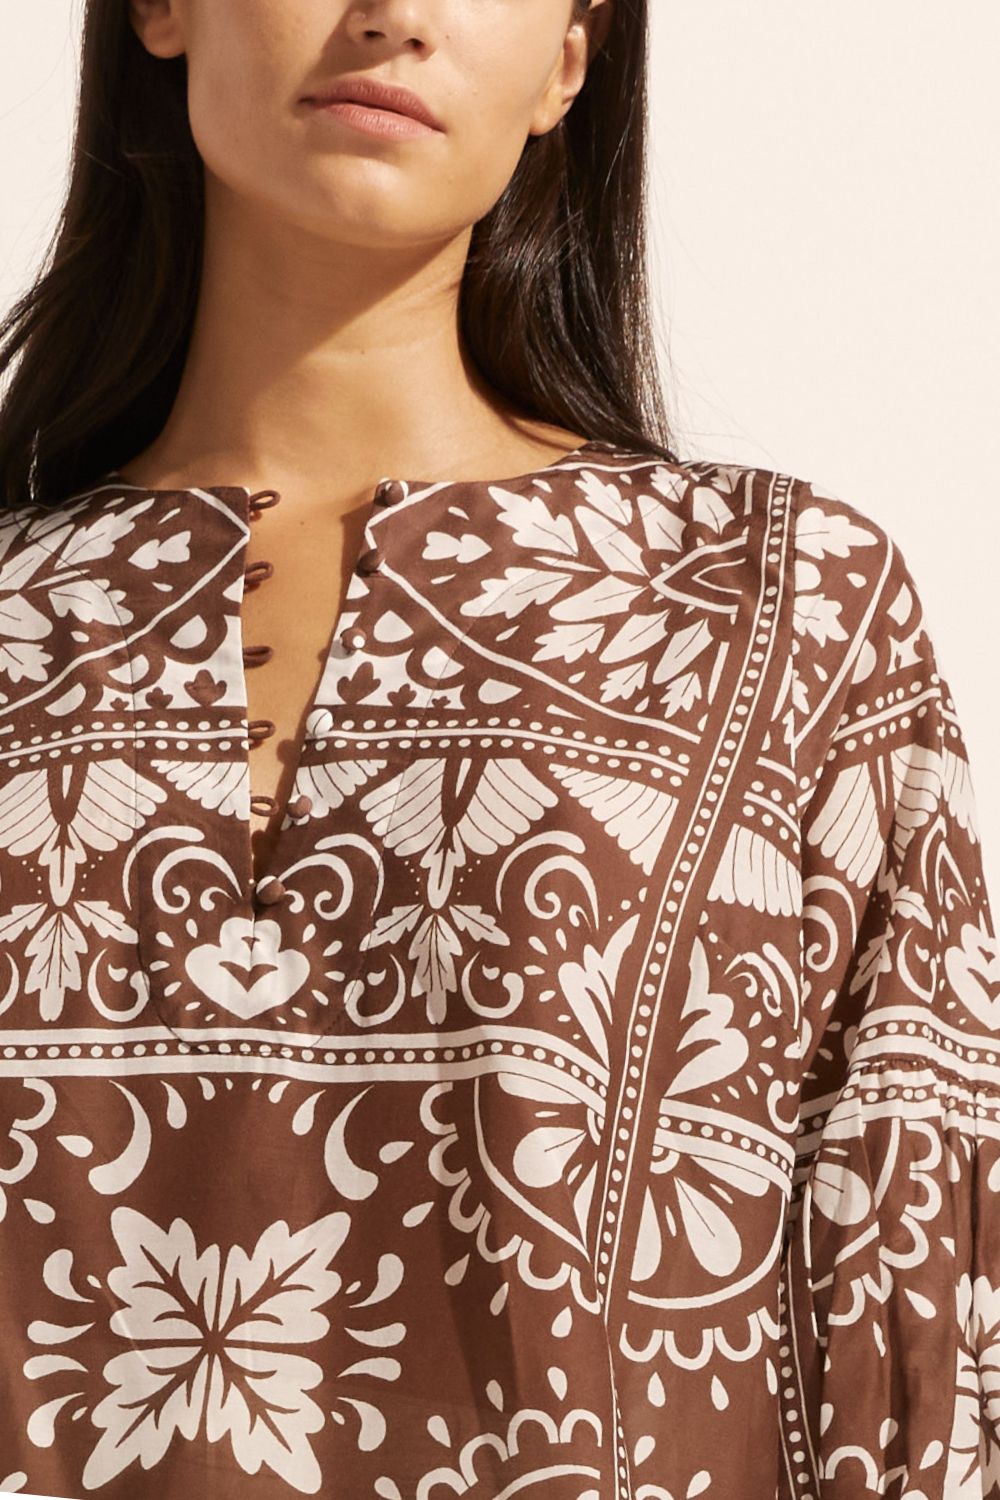 brown and white print, rounded neckline, mid length sleeve, close up view